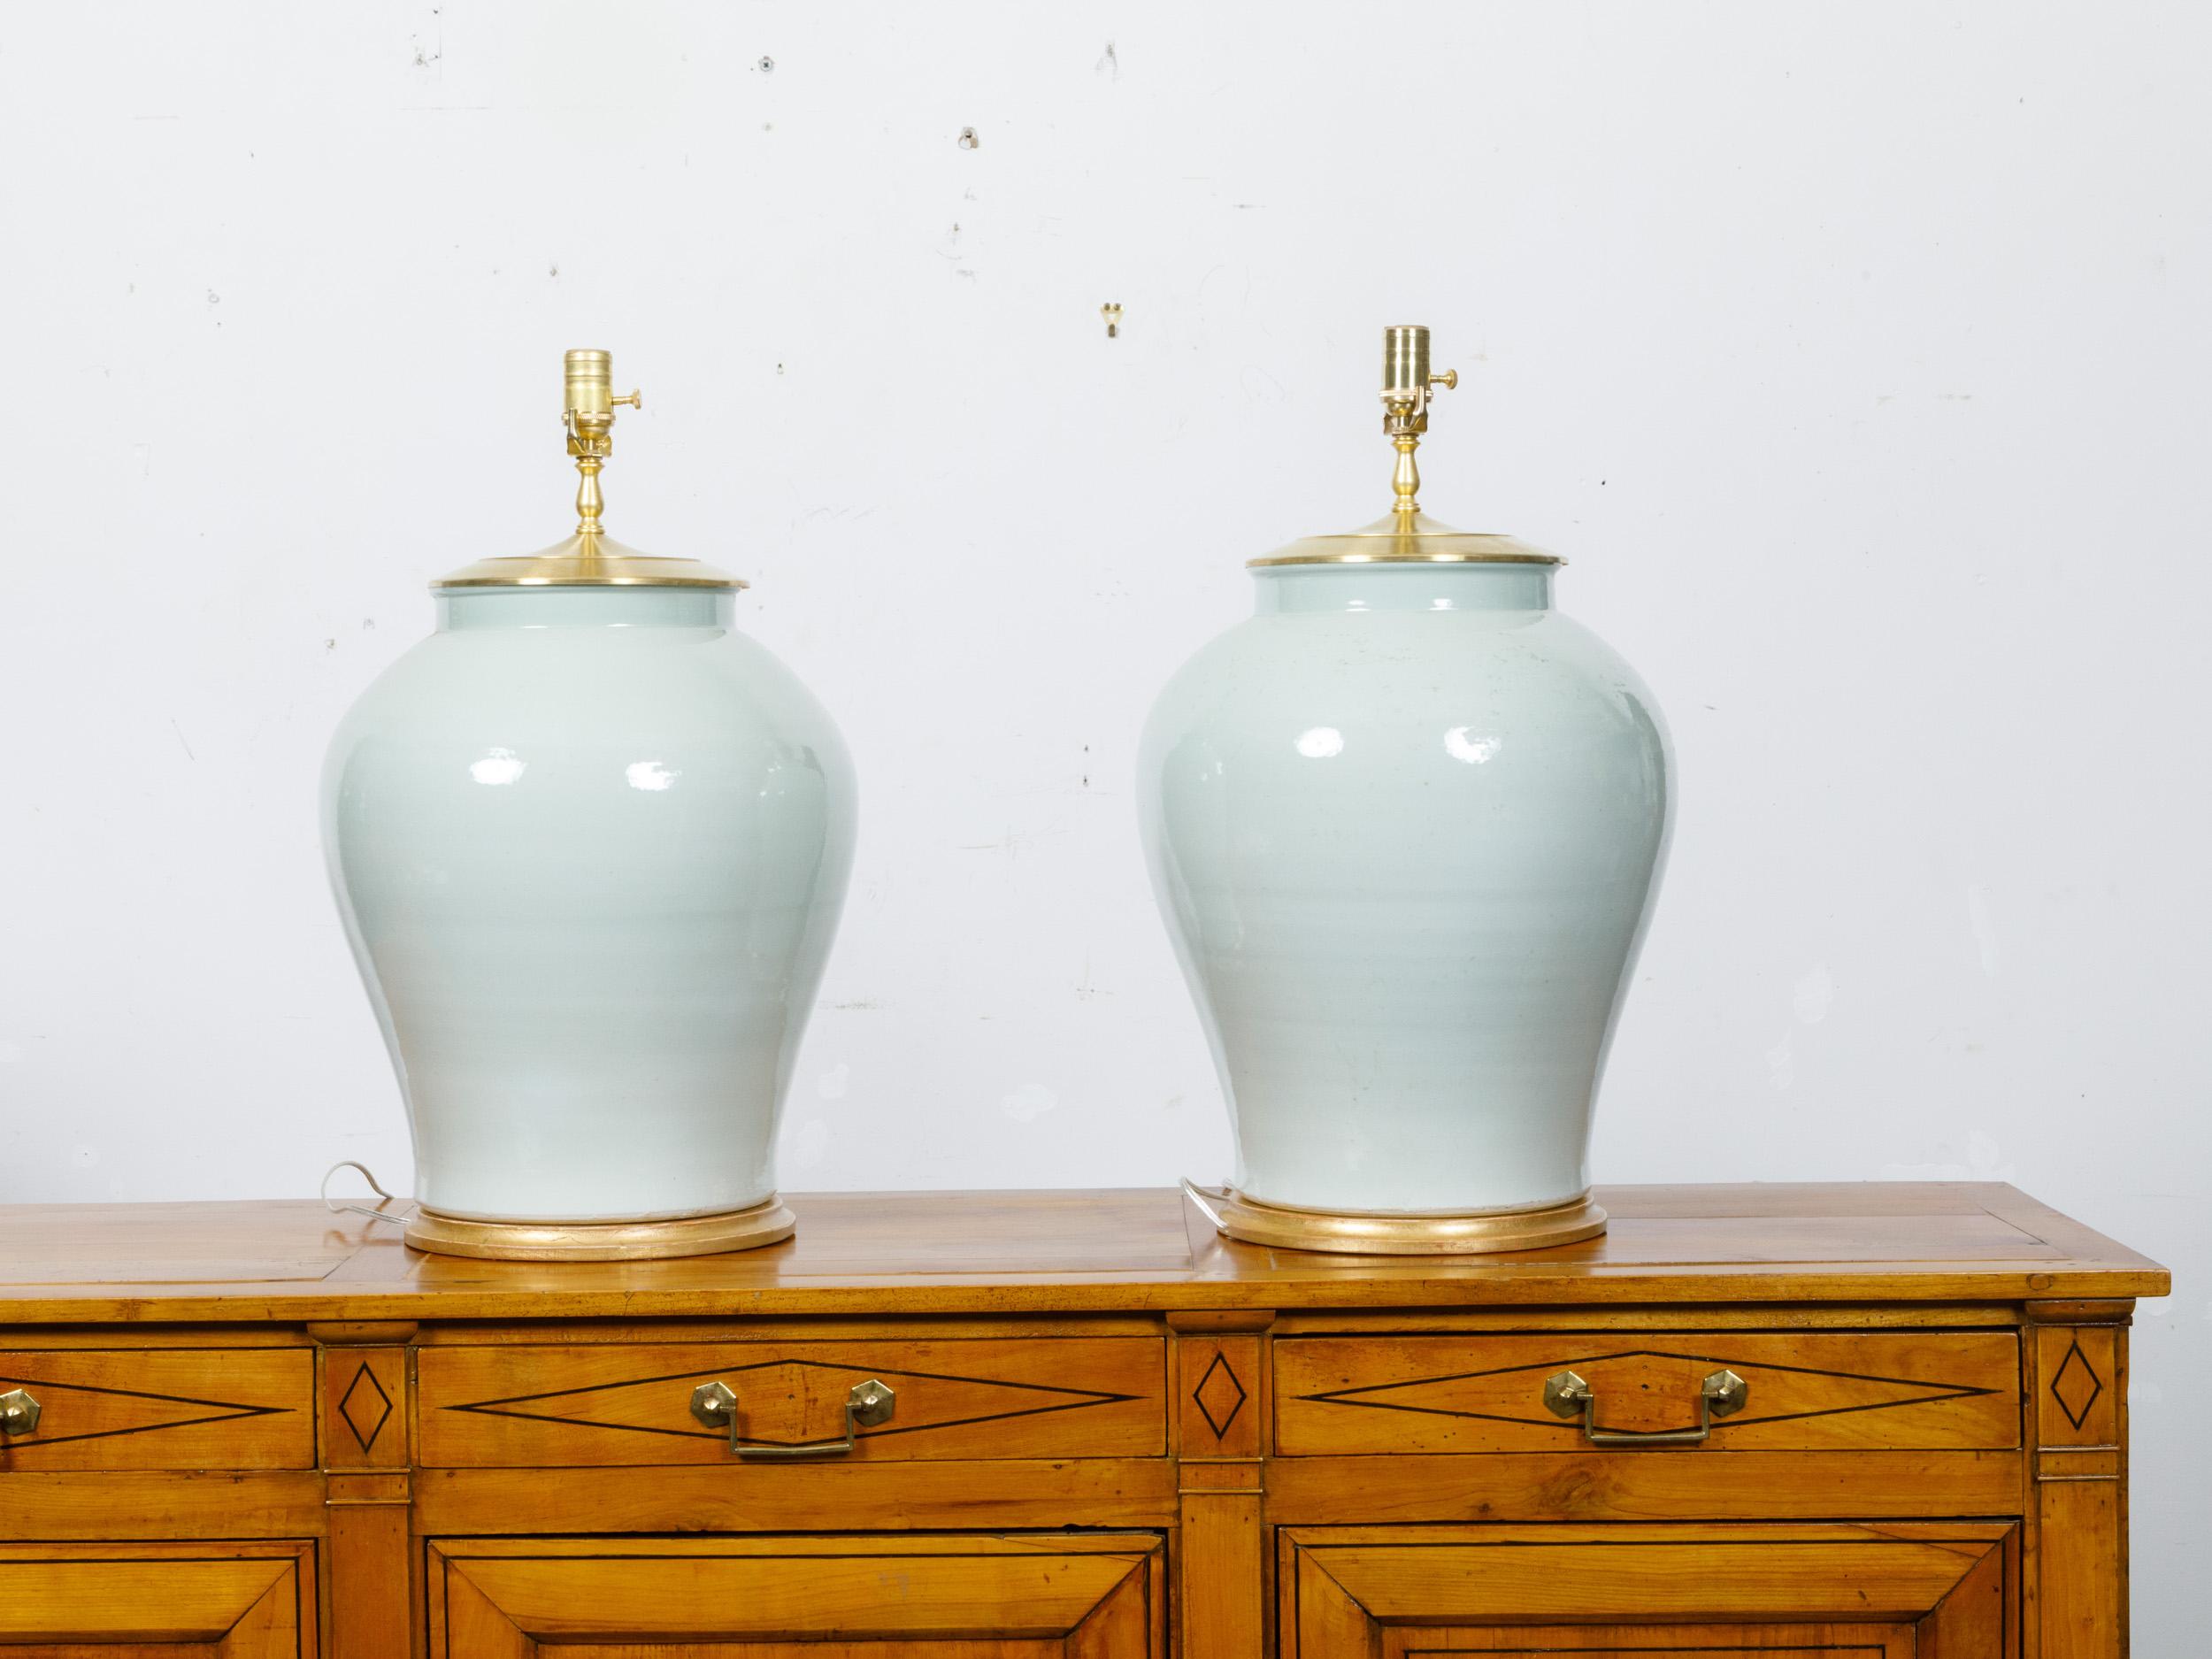 A pair of celadon porcelain table lamps mounted on circular giltwood bases and wired for the USA. This pair of elegant table lamps, crafted from celadon porcelain, features a soft, serene green glaze that embodies the timeless grace of traditional